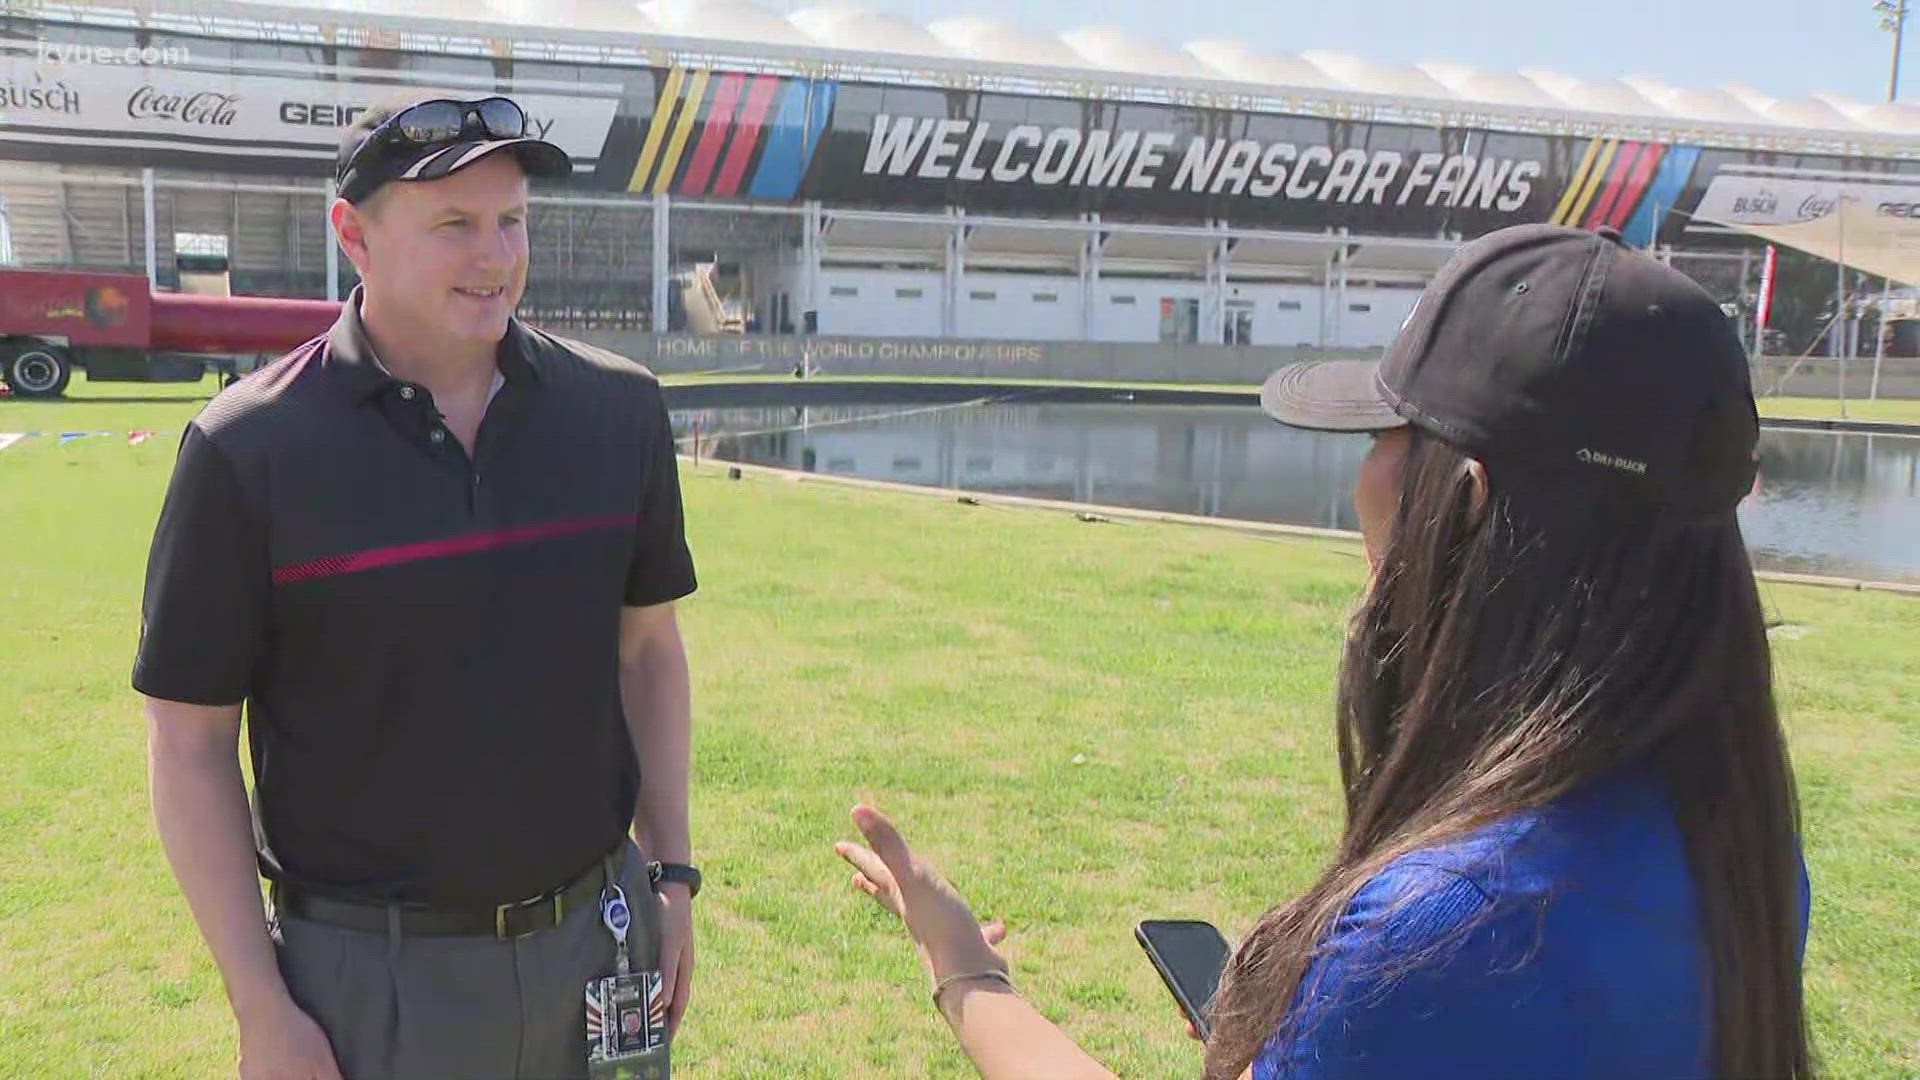 Scott Cooper with Speedway Motorsports joined KVUE's Pamela Comme to discuss what racing fans can expect.